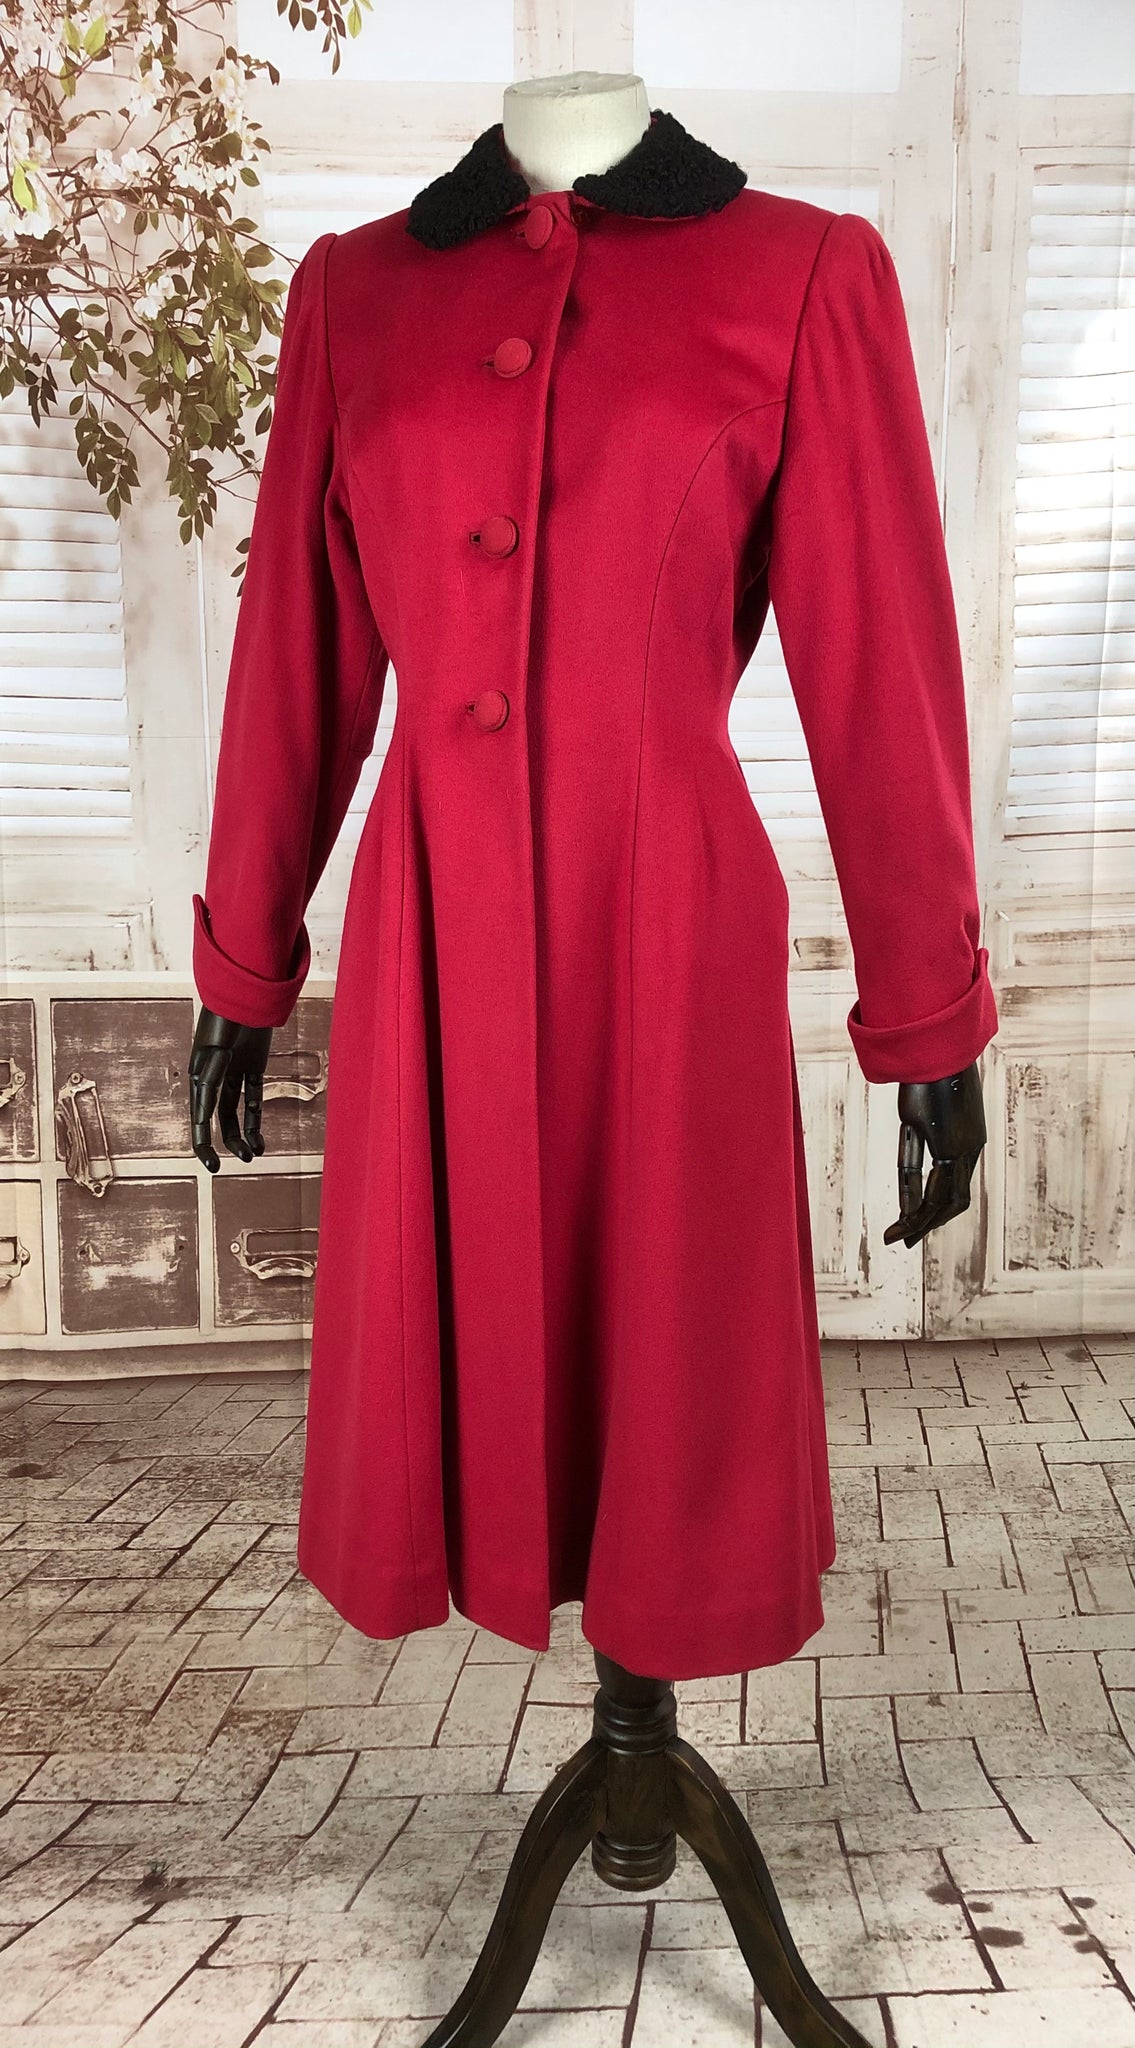 Original 1940s 40s Vintage Red Princess Coat With Astrakhan Collar By ...